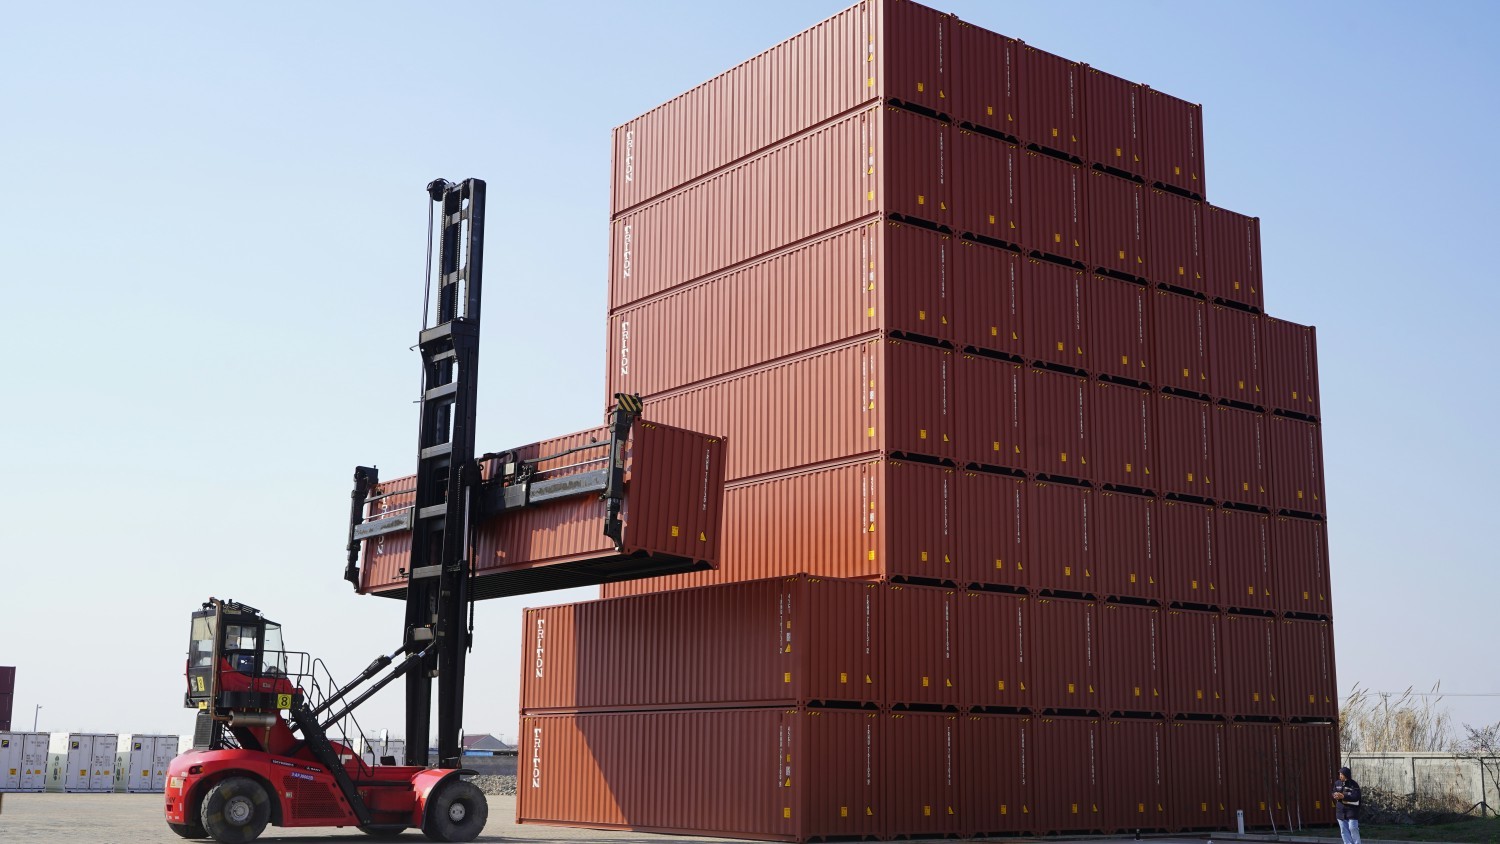 We just love looking at big stacks of containers. 